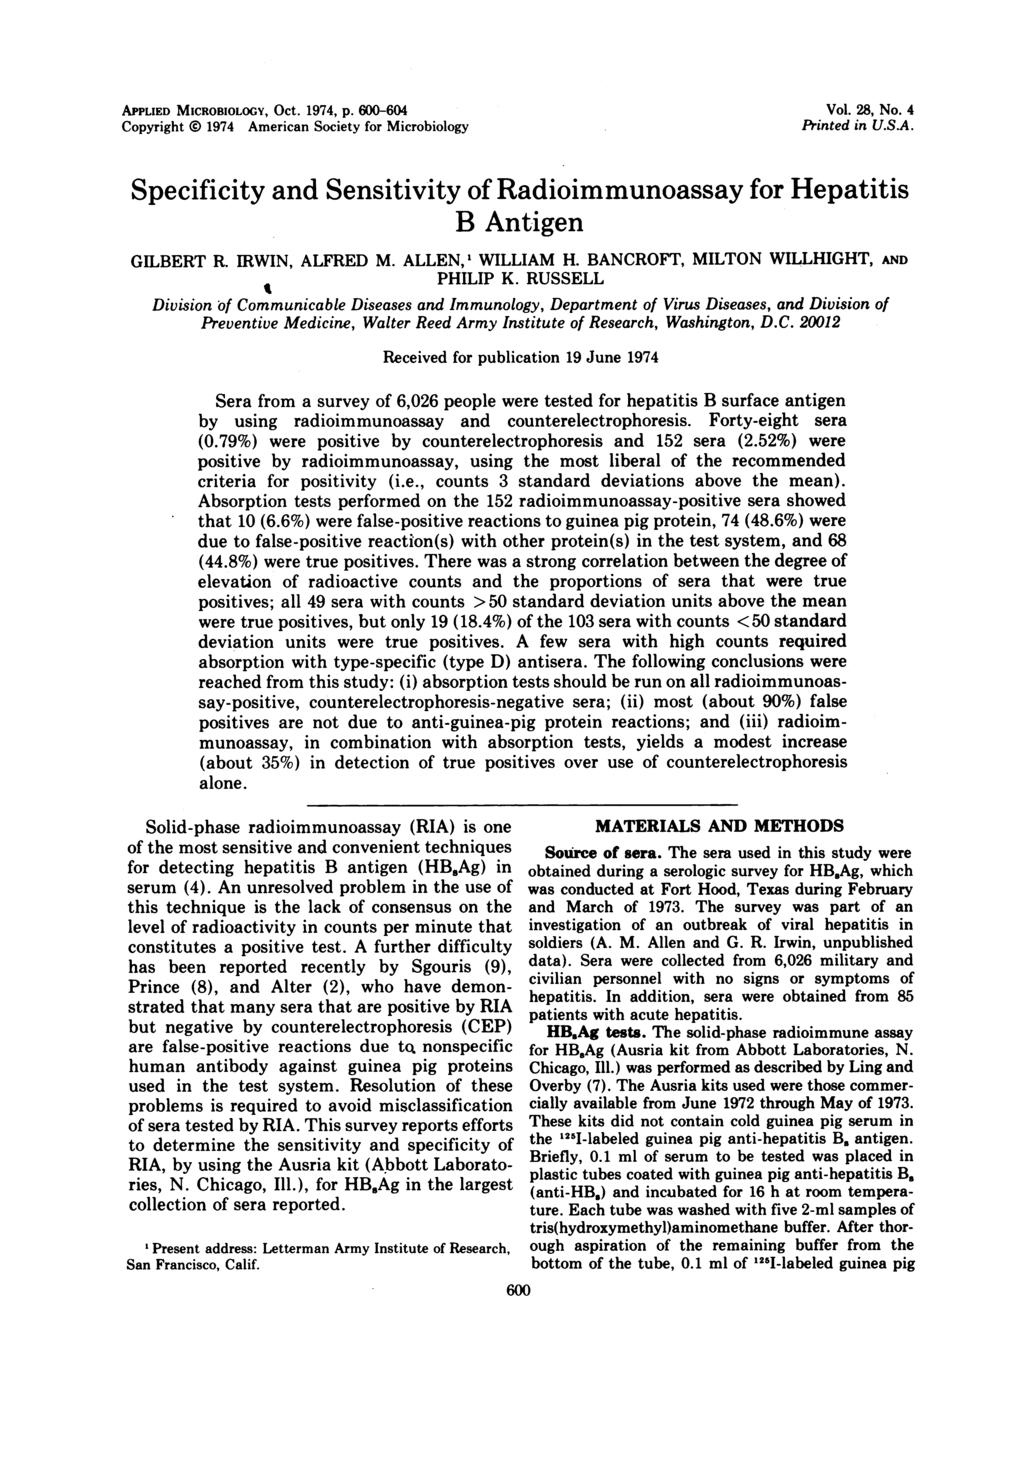 APPLIED MICROBIOLOGY, Oct. 1974, P. 600-604 Copyright 0 1974 American Society for Microbiology Vol. 28, No. 4 Printed in U.S.A. Specificity and Sensitivity of Radioimmunoassay for Hepatitis B Antigen GILBERT R.